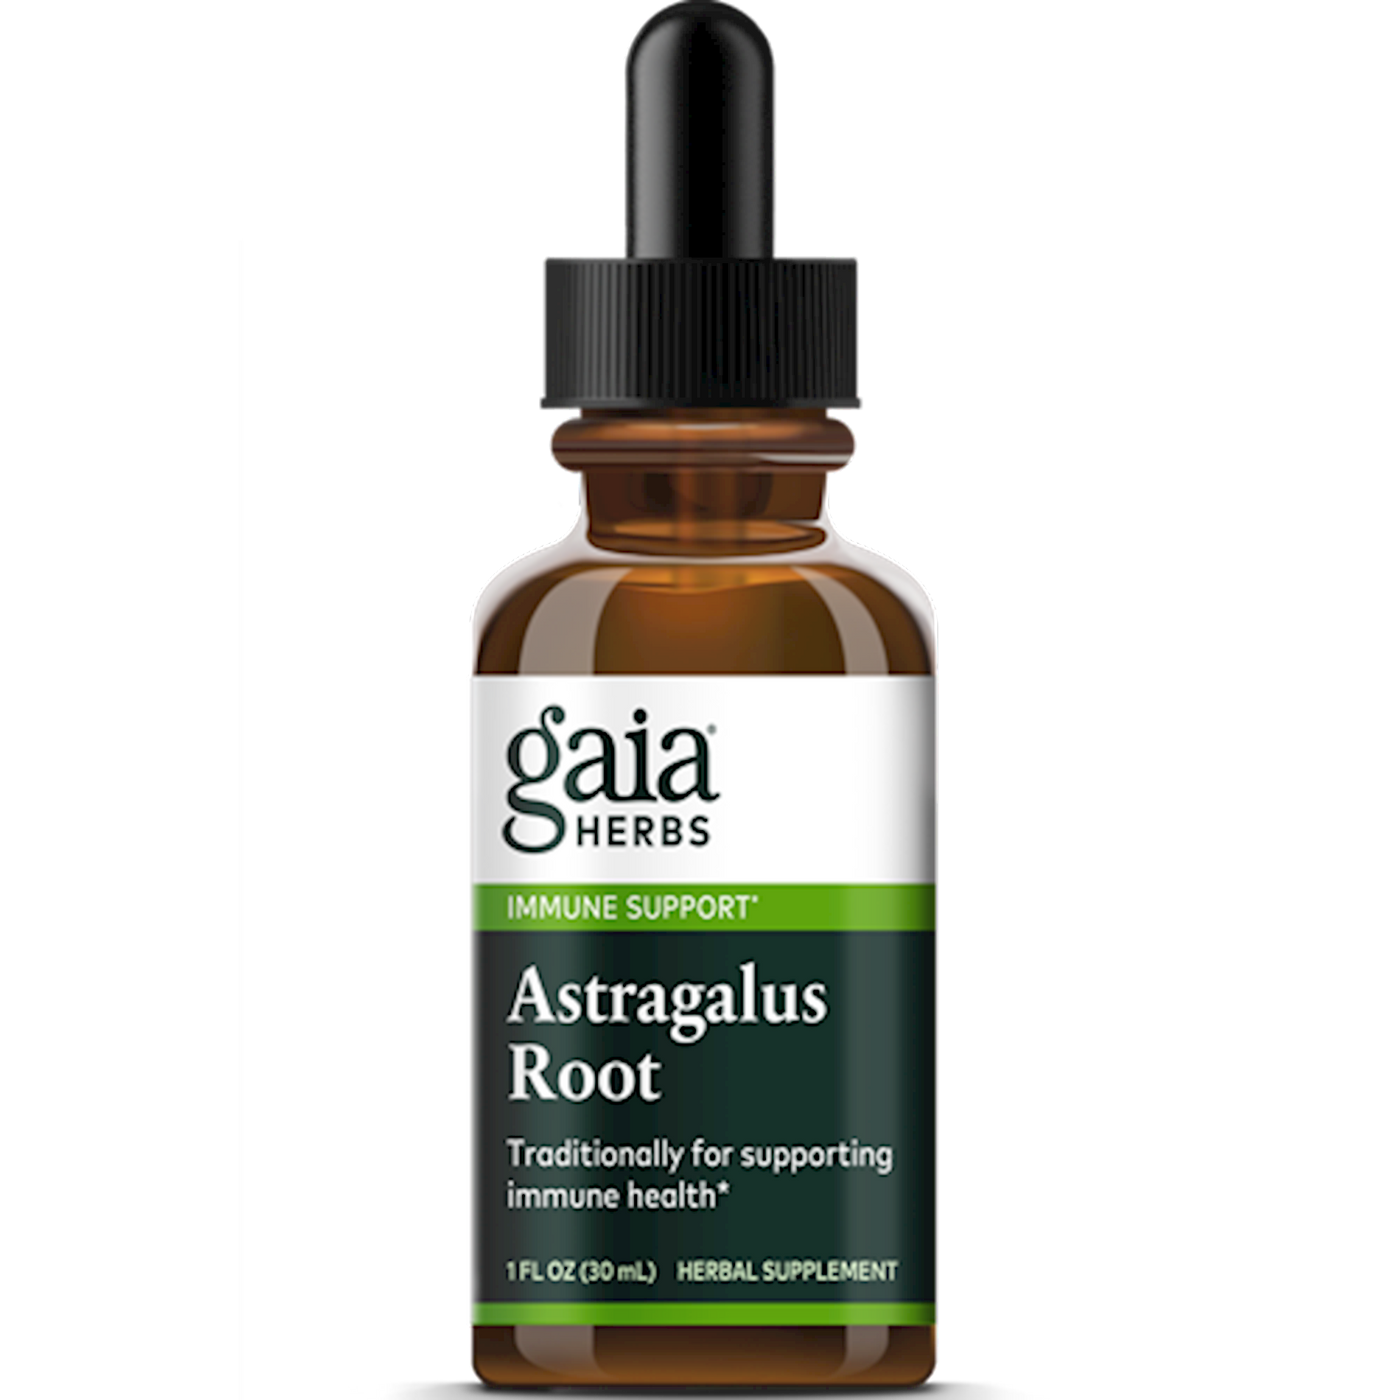 Astragalus Root  Curated Wellness